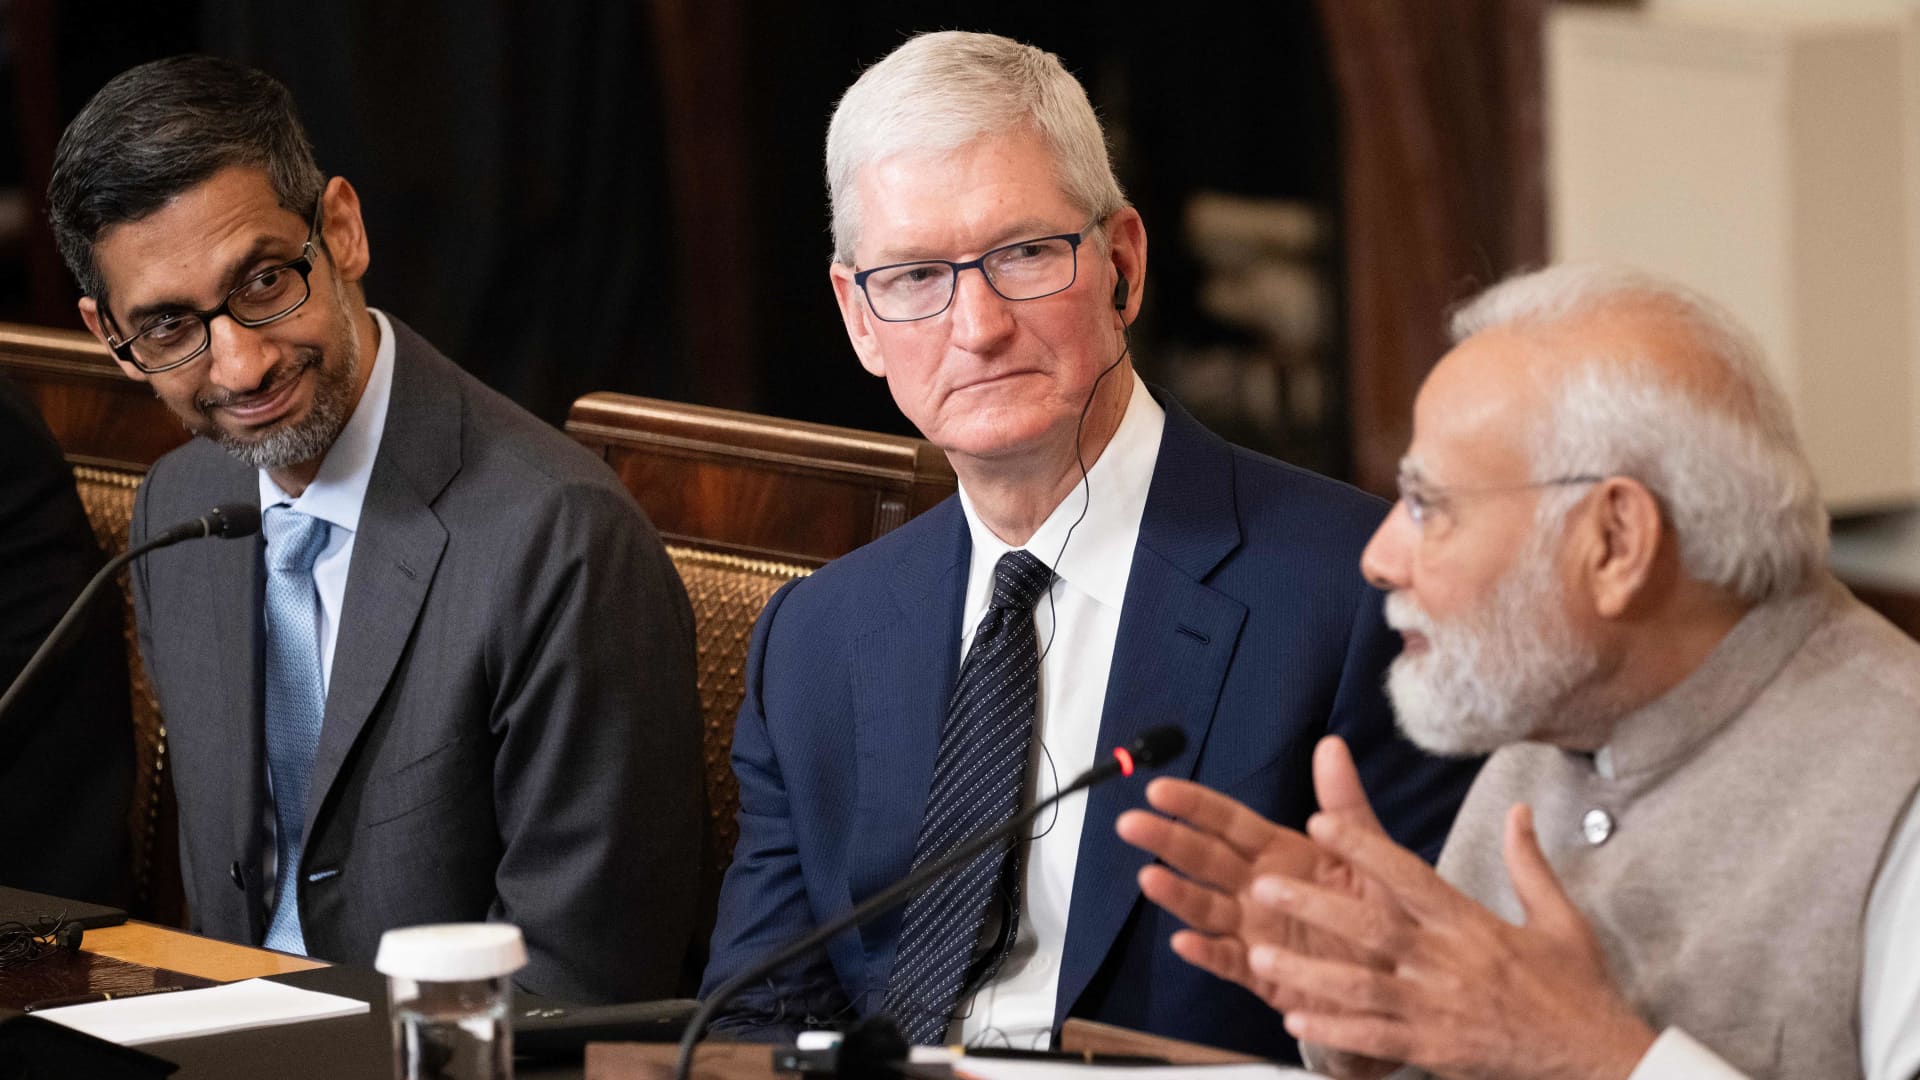 U.S. tech CEOs give India PM Modi strengthen in advance of election